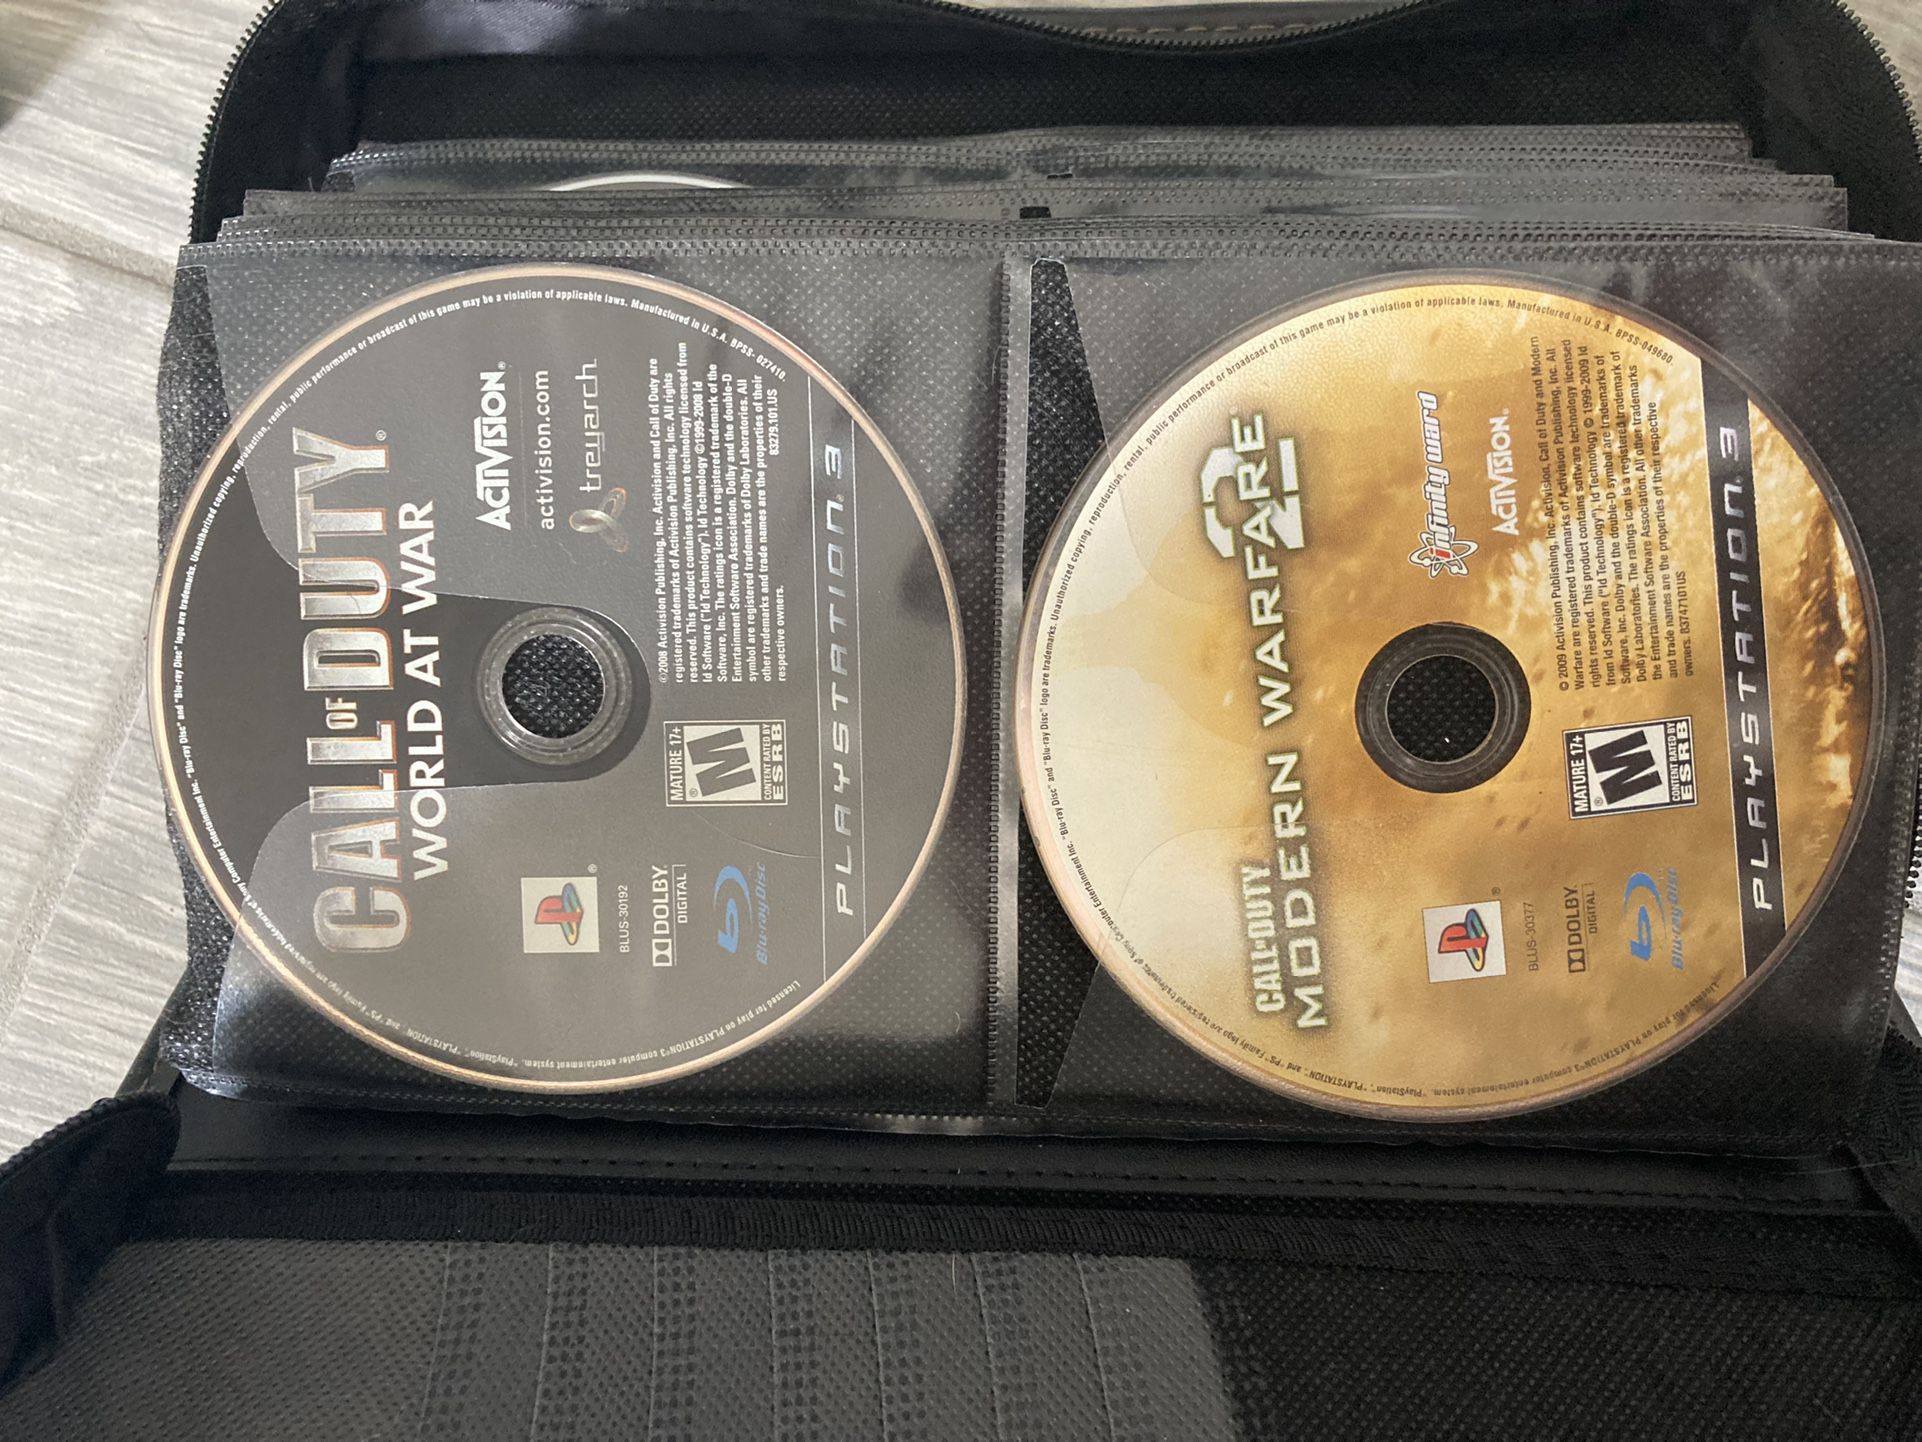 PS3 Games In A Leather CD Case 